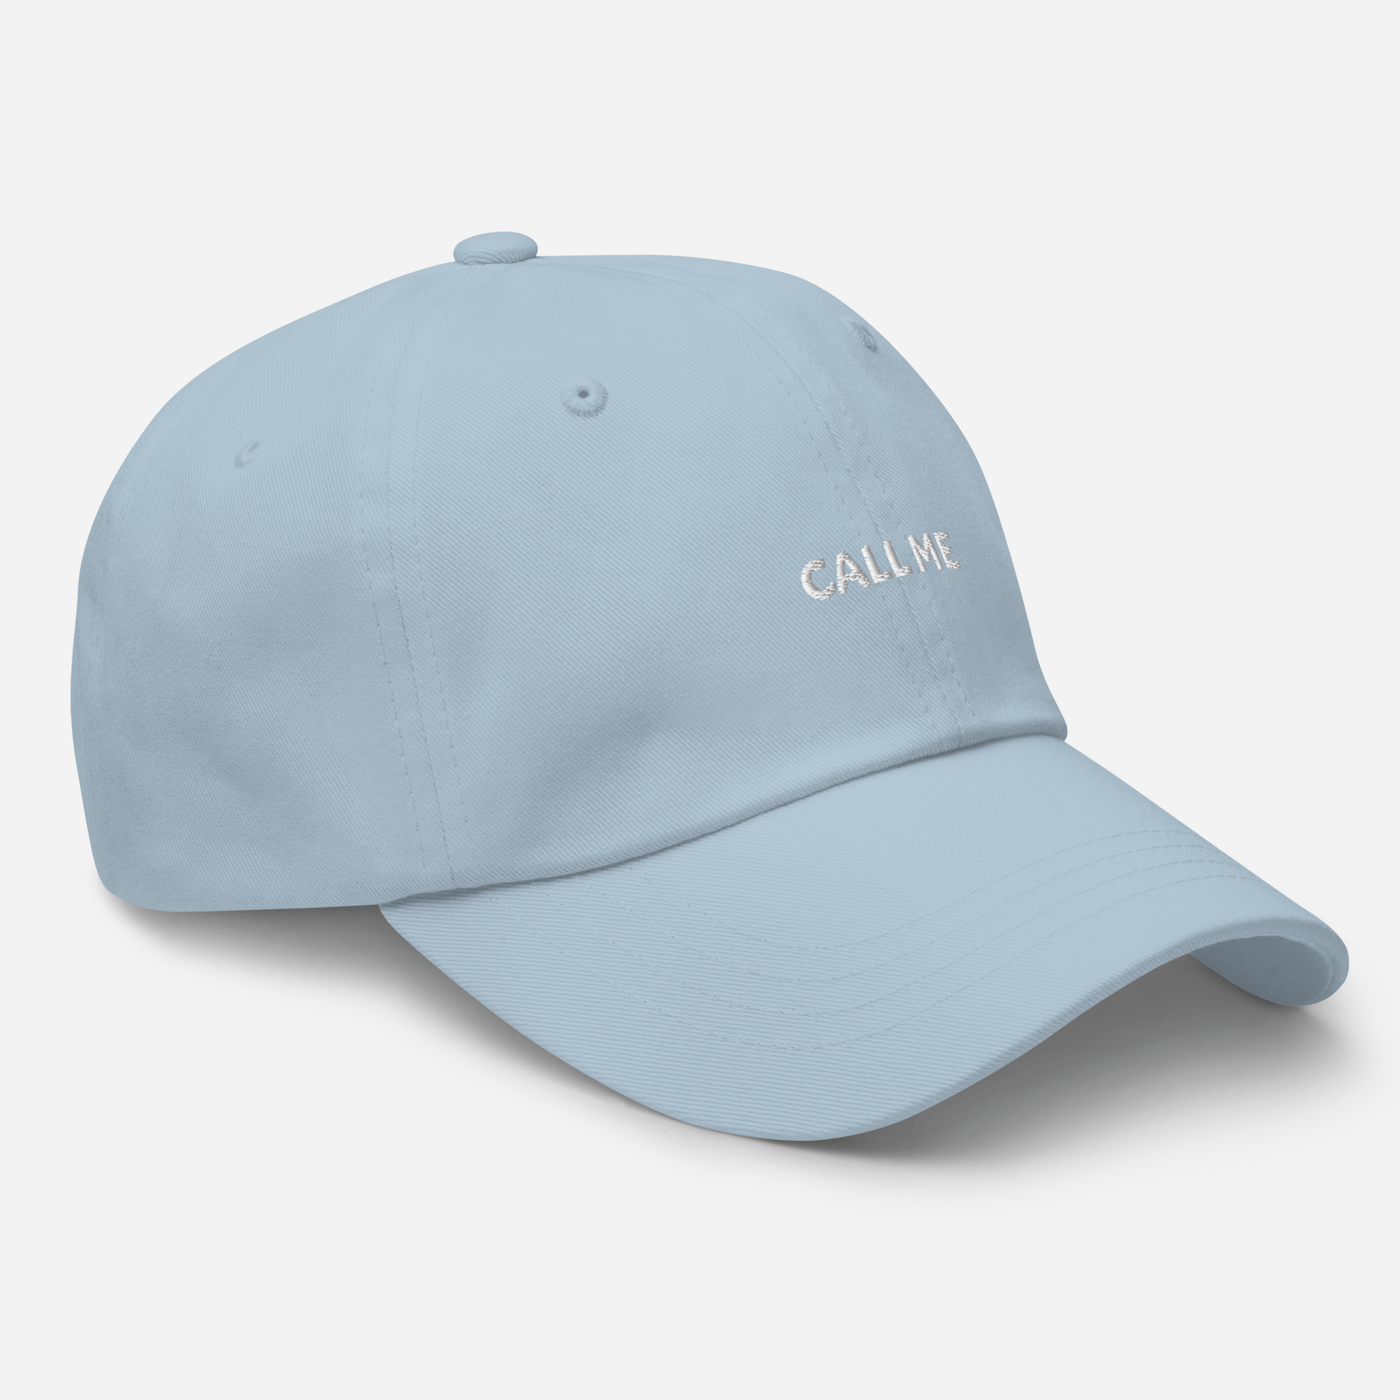 Call Me Dad hat - Light Blue - - Just Another Cap Store